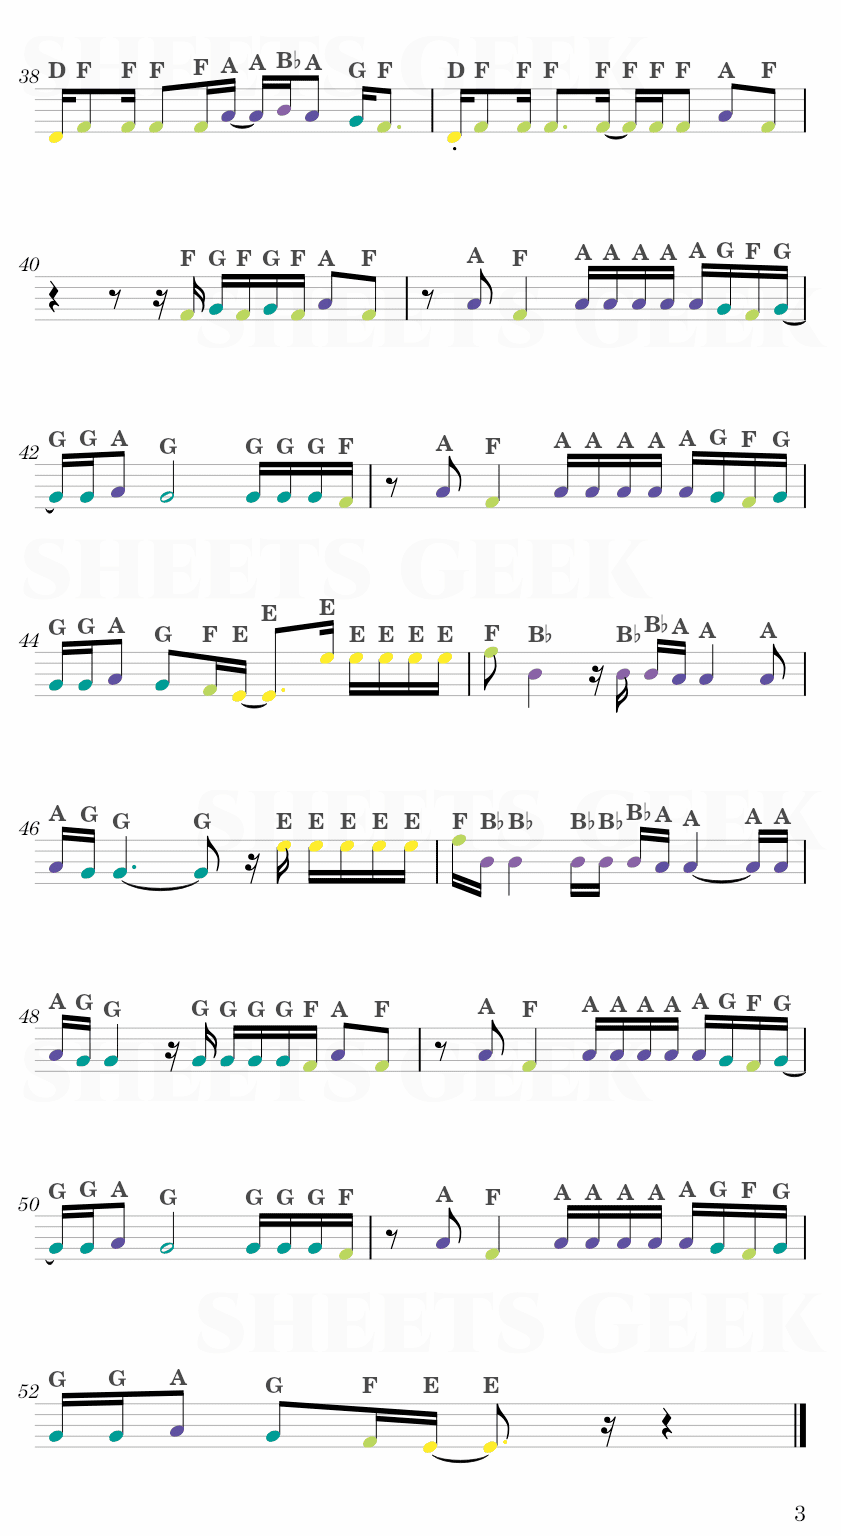 When you're gone - Shawn Mendes Easy Sheet Music Free for piano, keyboard, flute, violin, sax, cello page 3